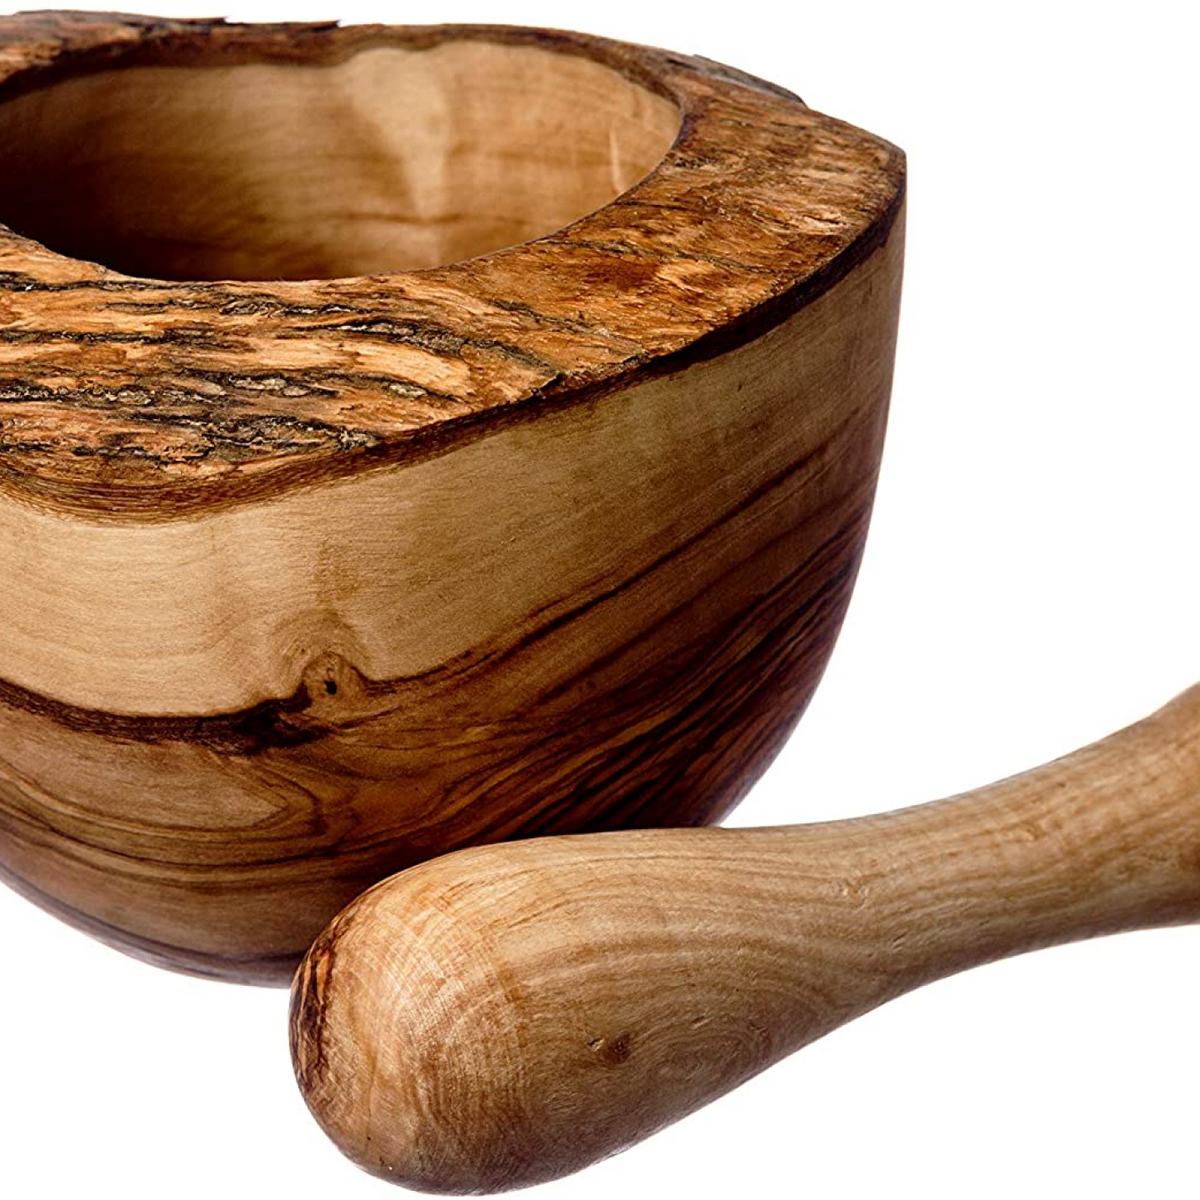 Olive Wood Mortar Small